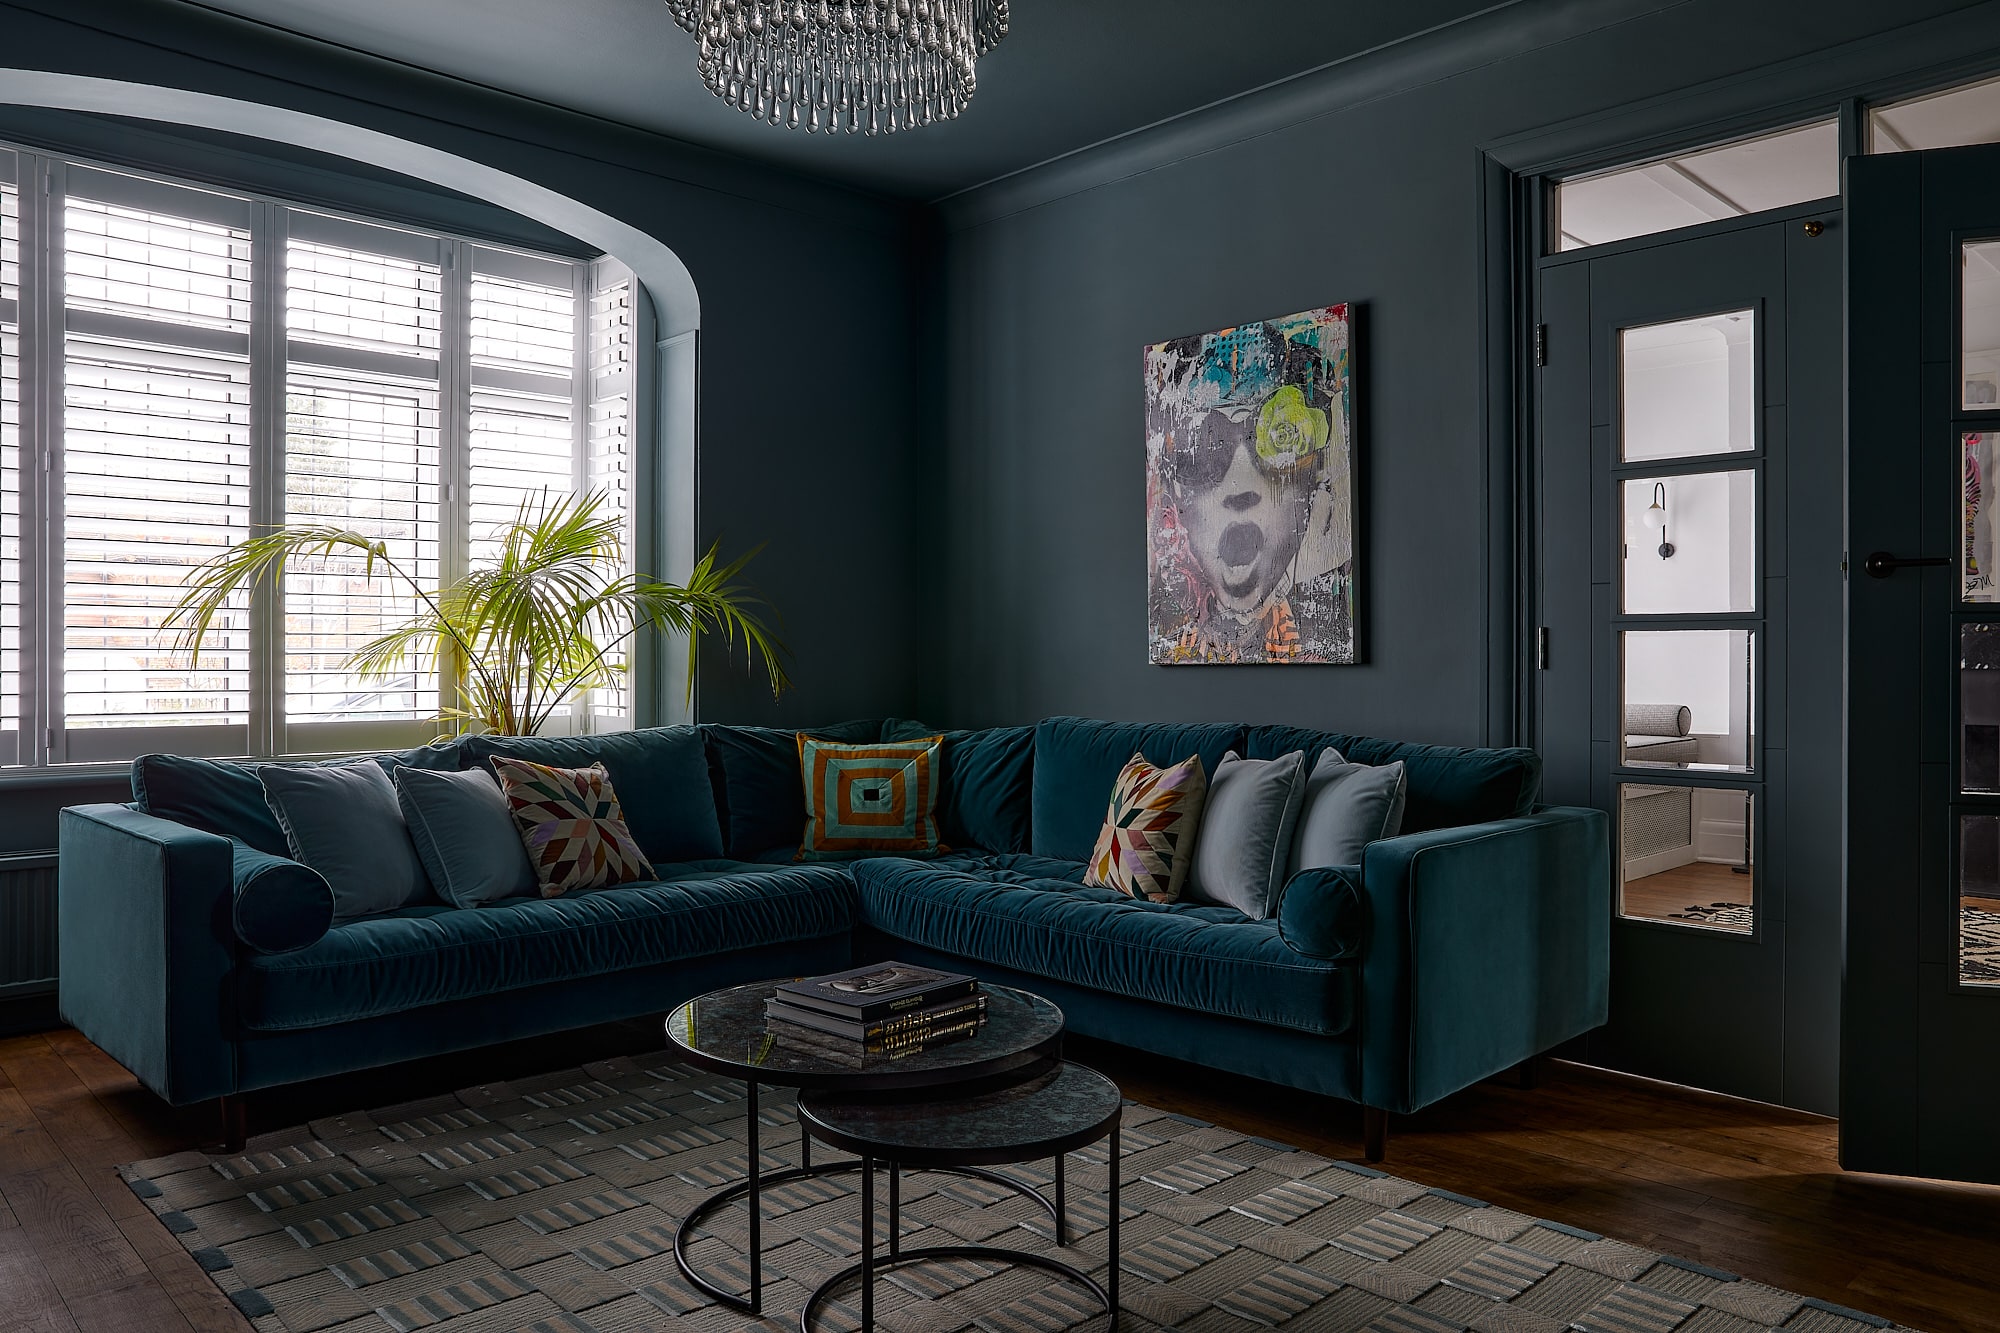 moody dark sitting room with grey blue walls and ceiling